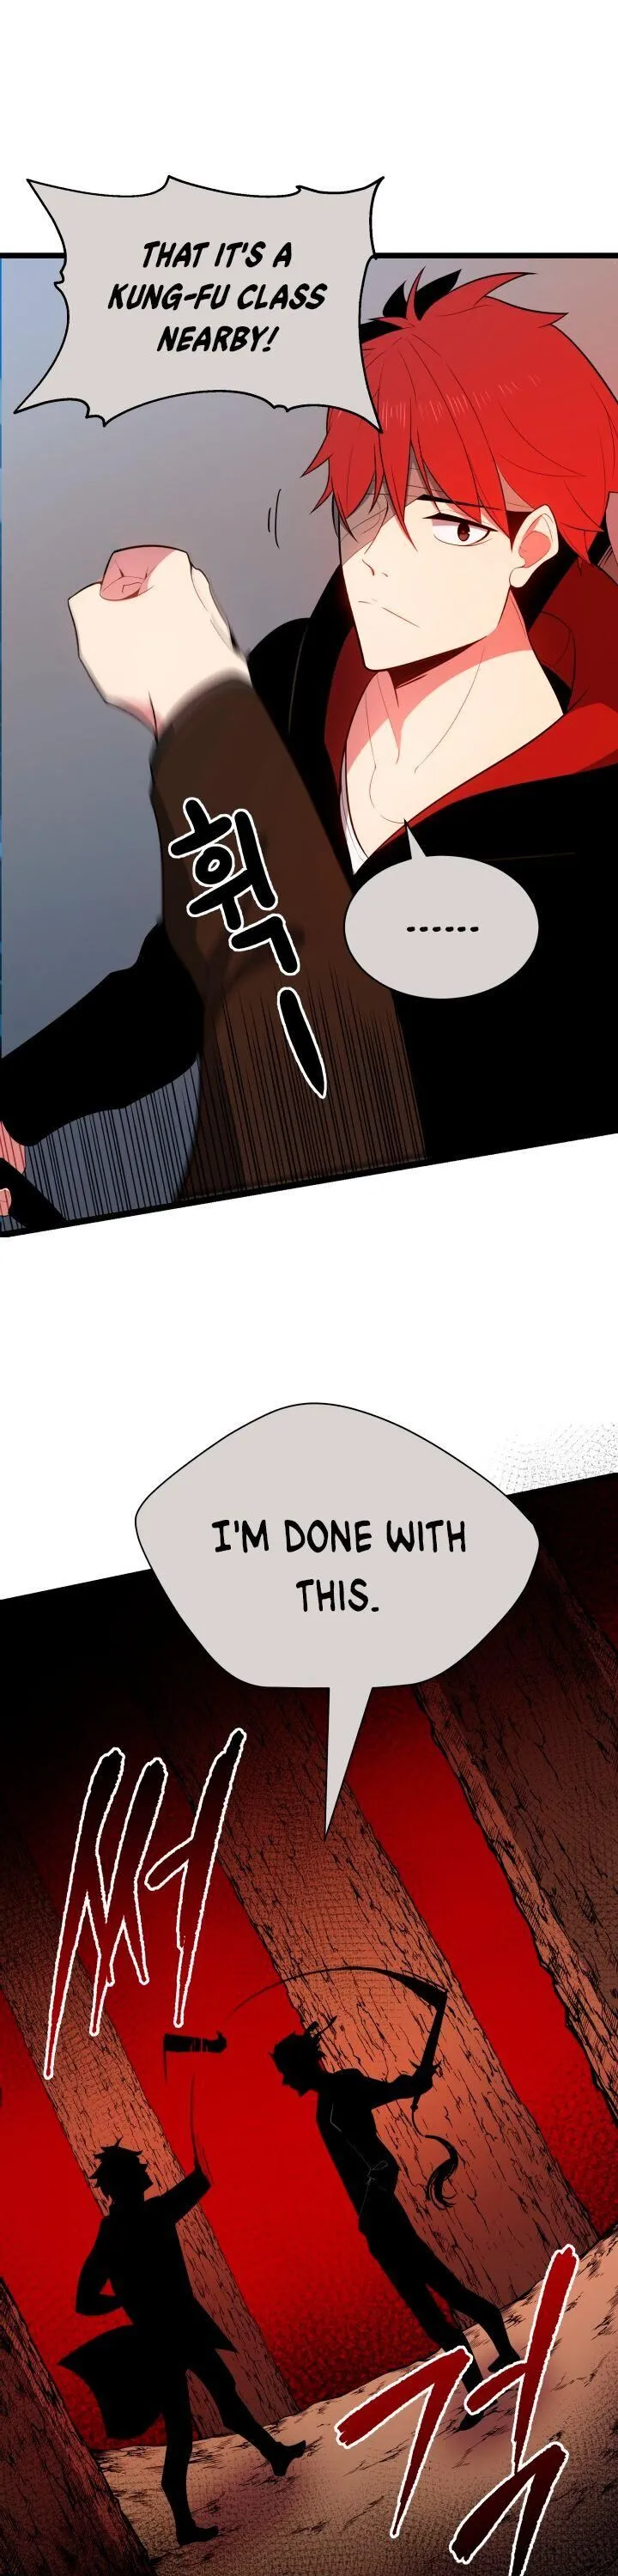 The Descent of the Demonic Master Chapter 031 page 3